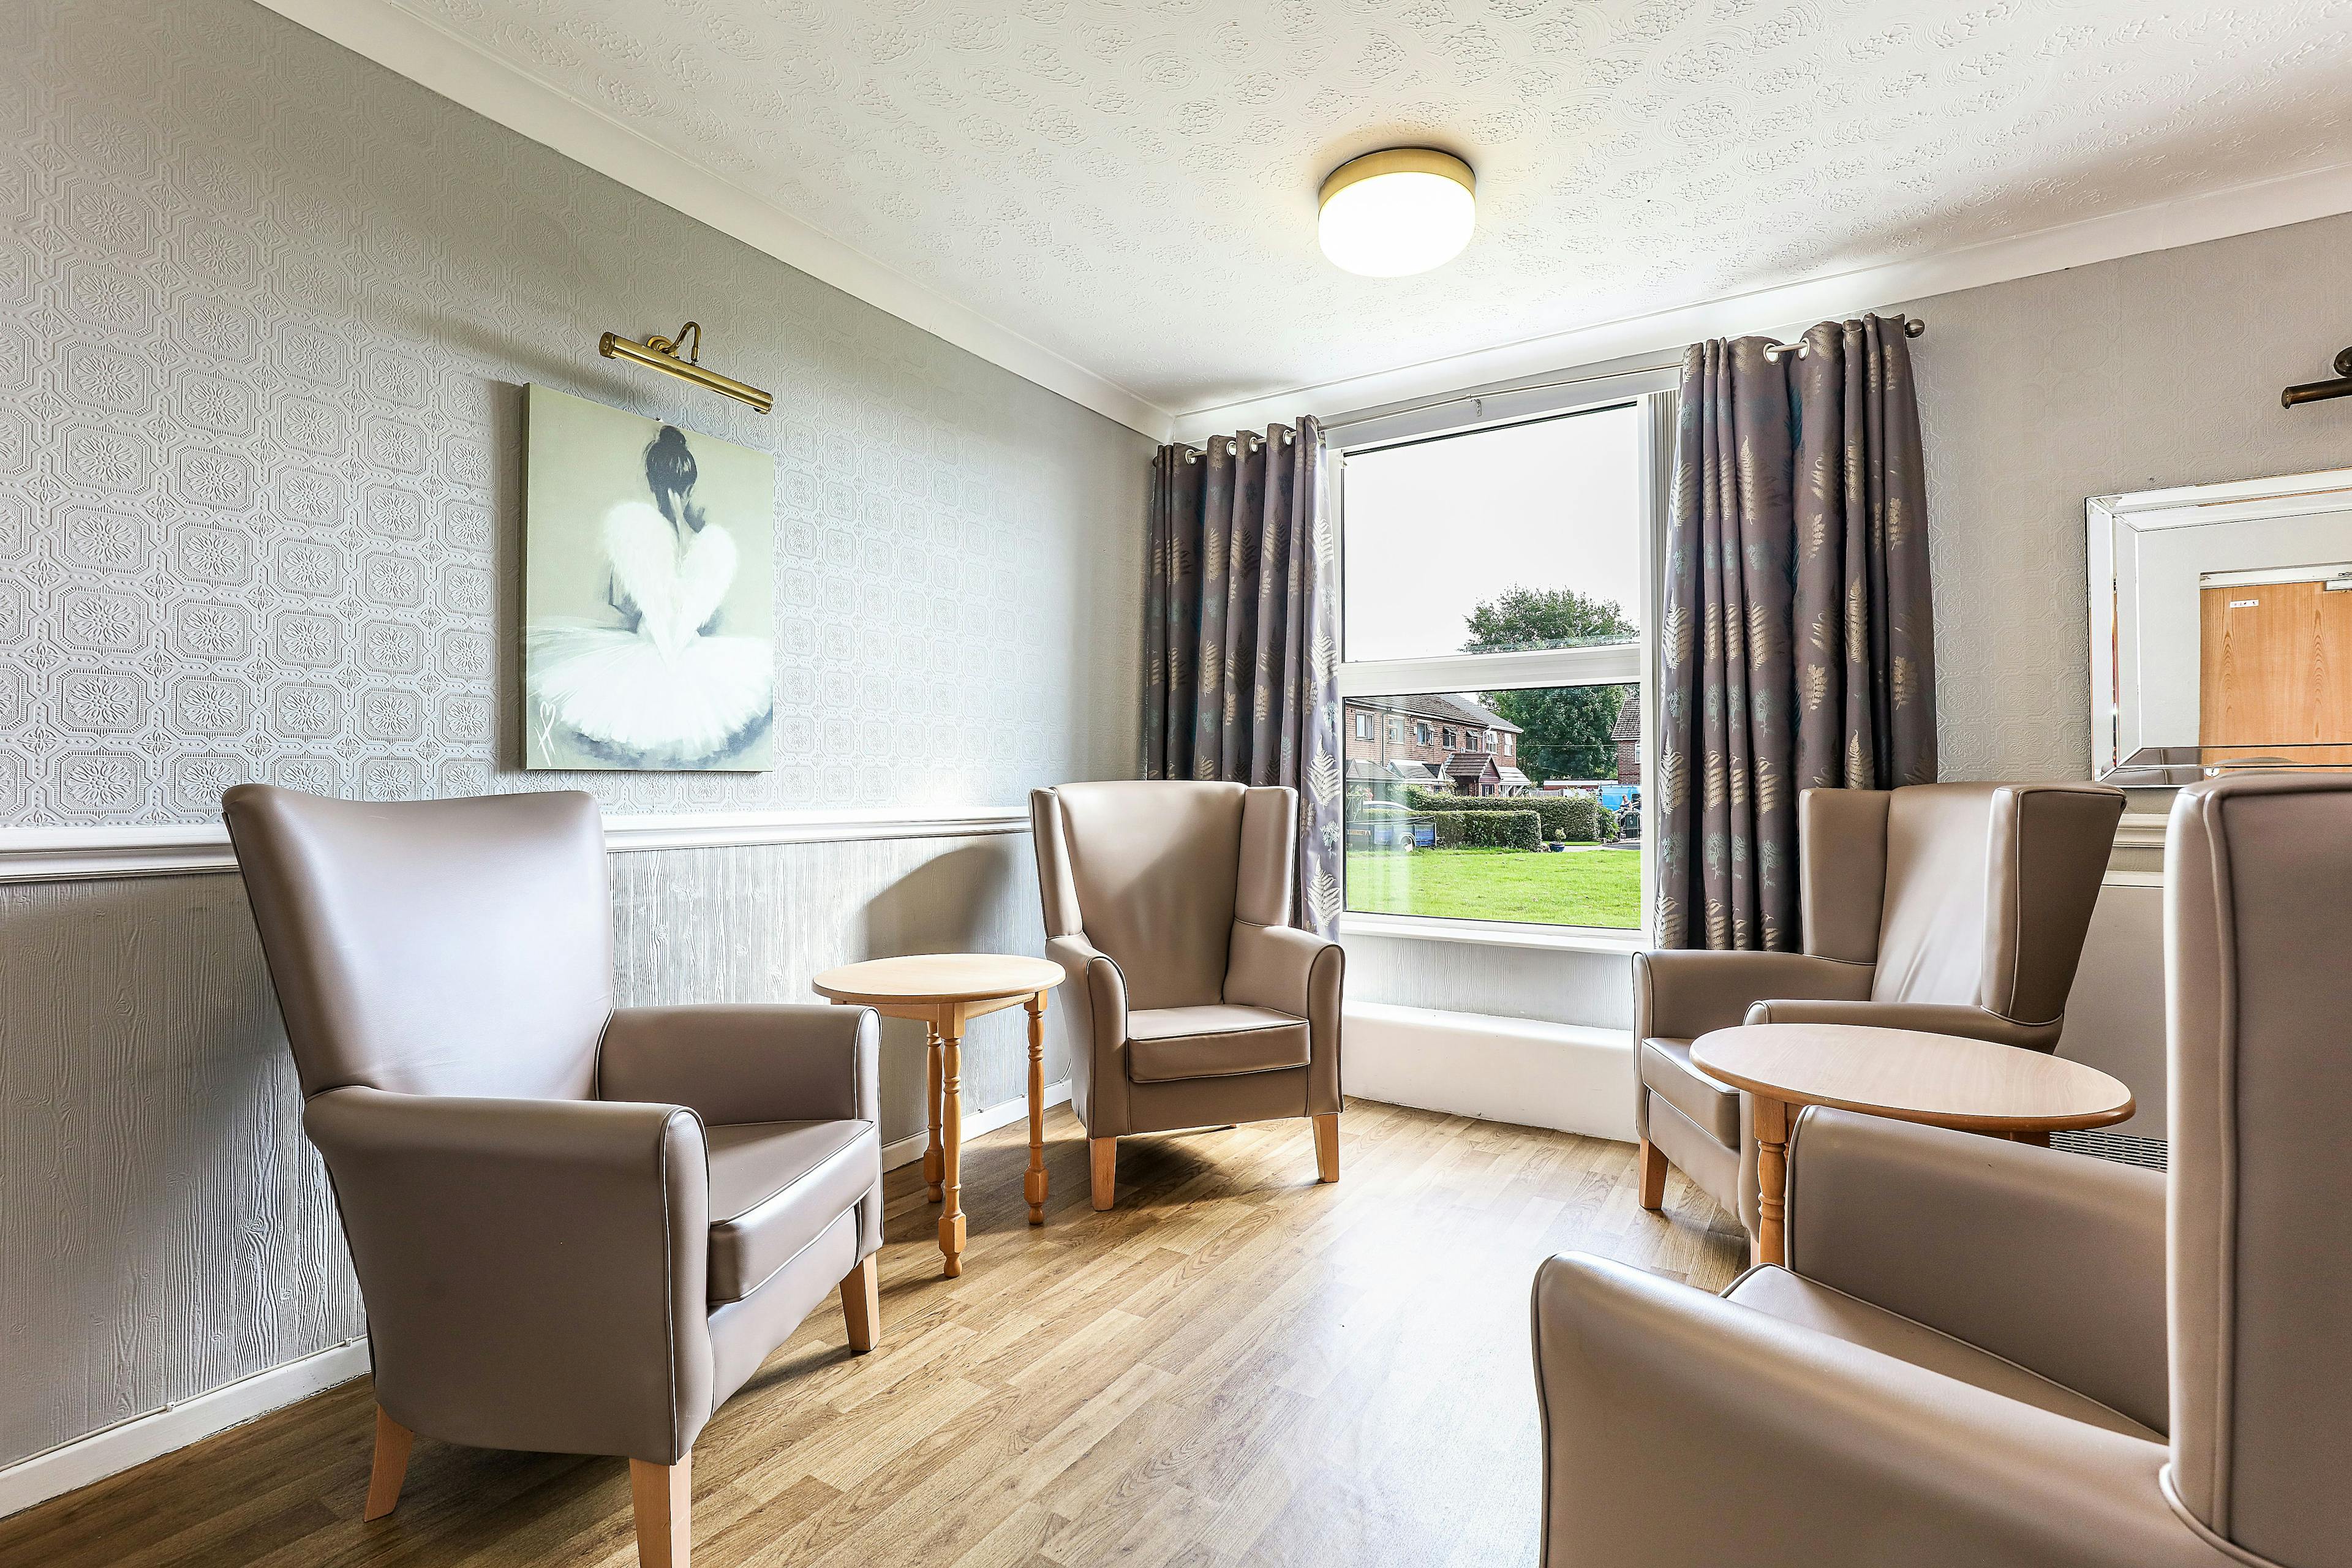 Thorley House care home